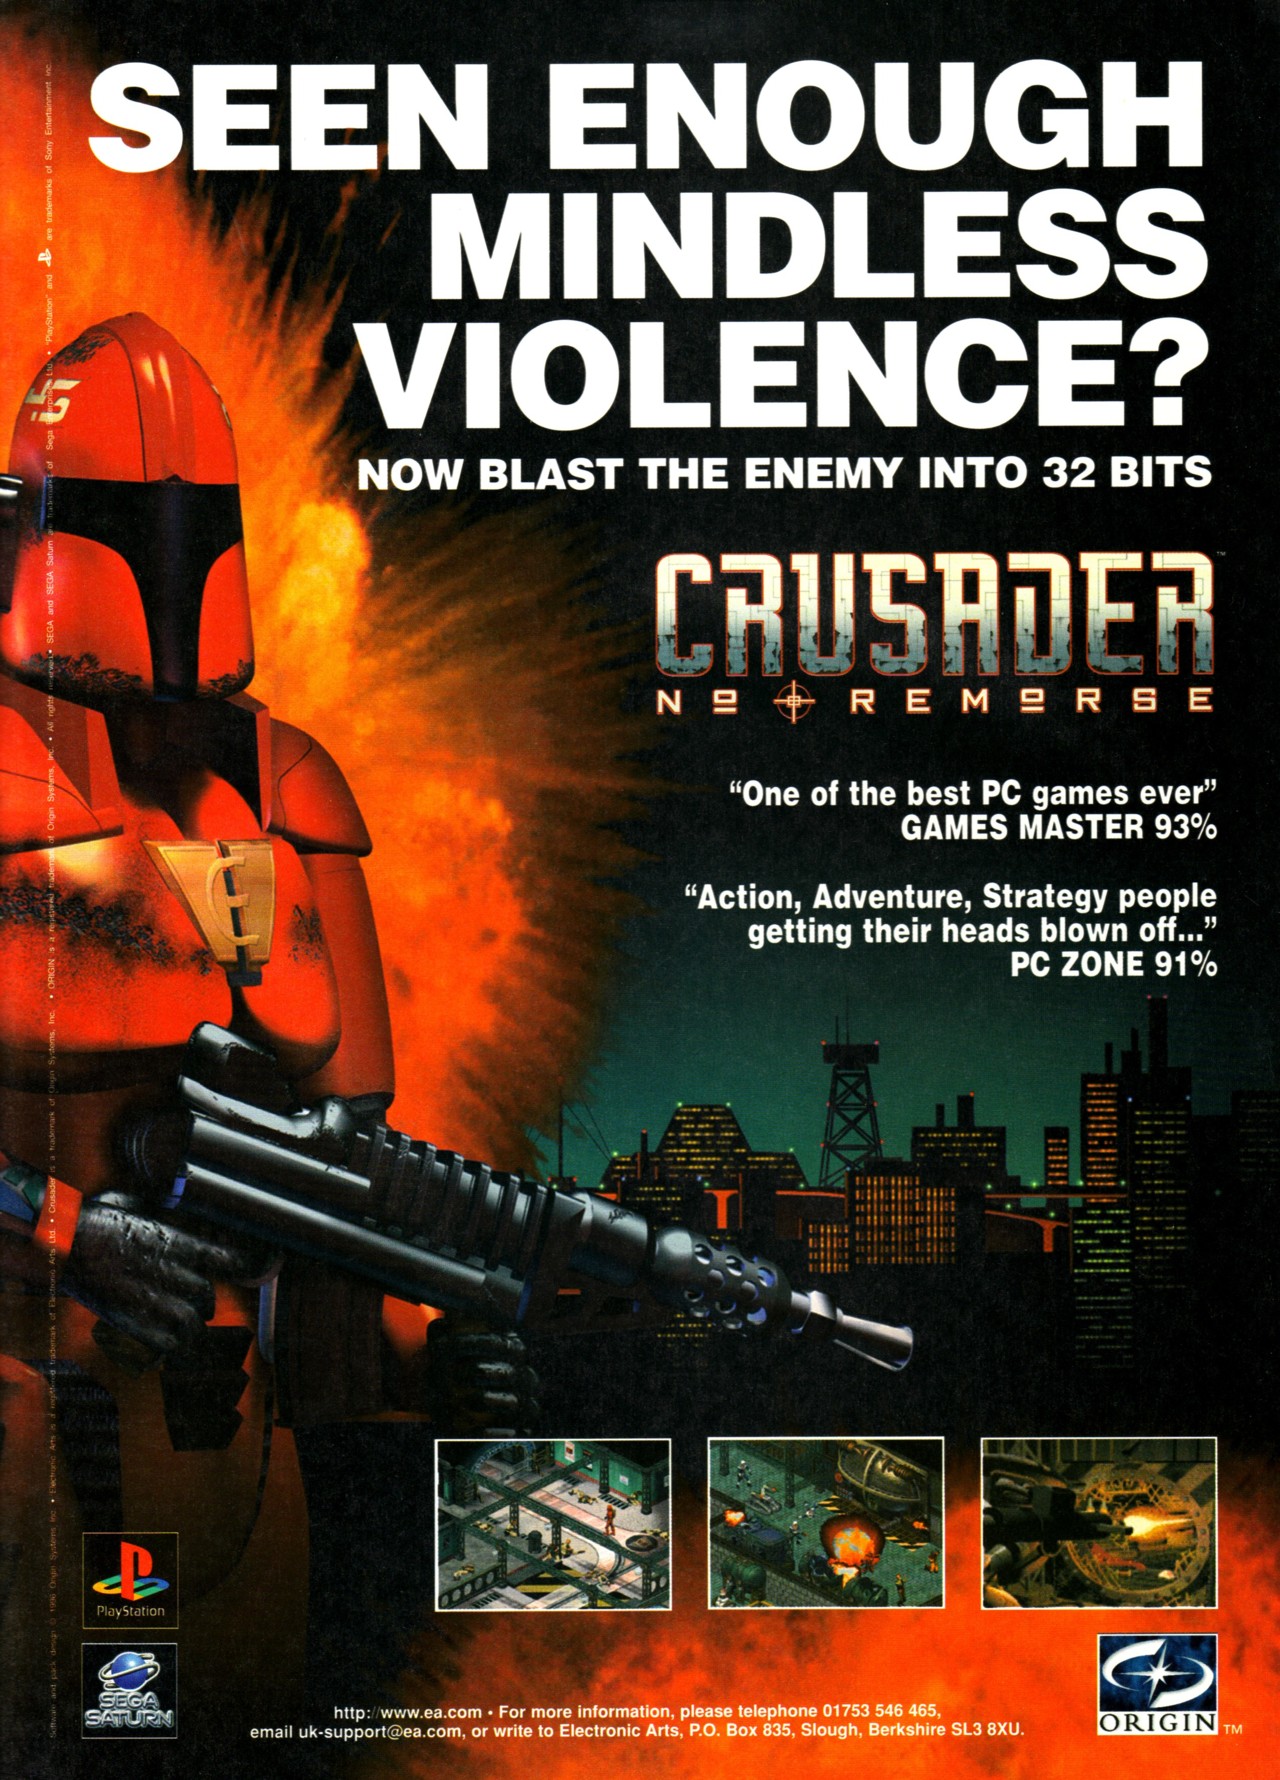 crusader no remorse box - Seen Enough Mindless Violence? Now Blast The Enemy Into 32 Bits Causader Remdr 5 E "One of the best Pc games ever" Games Master 93% "Action, Adventure, Strategy people getting their heads blown off..." Pc Zone 91% Le Origin